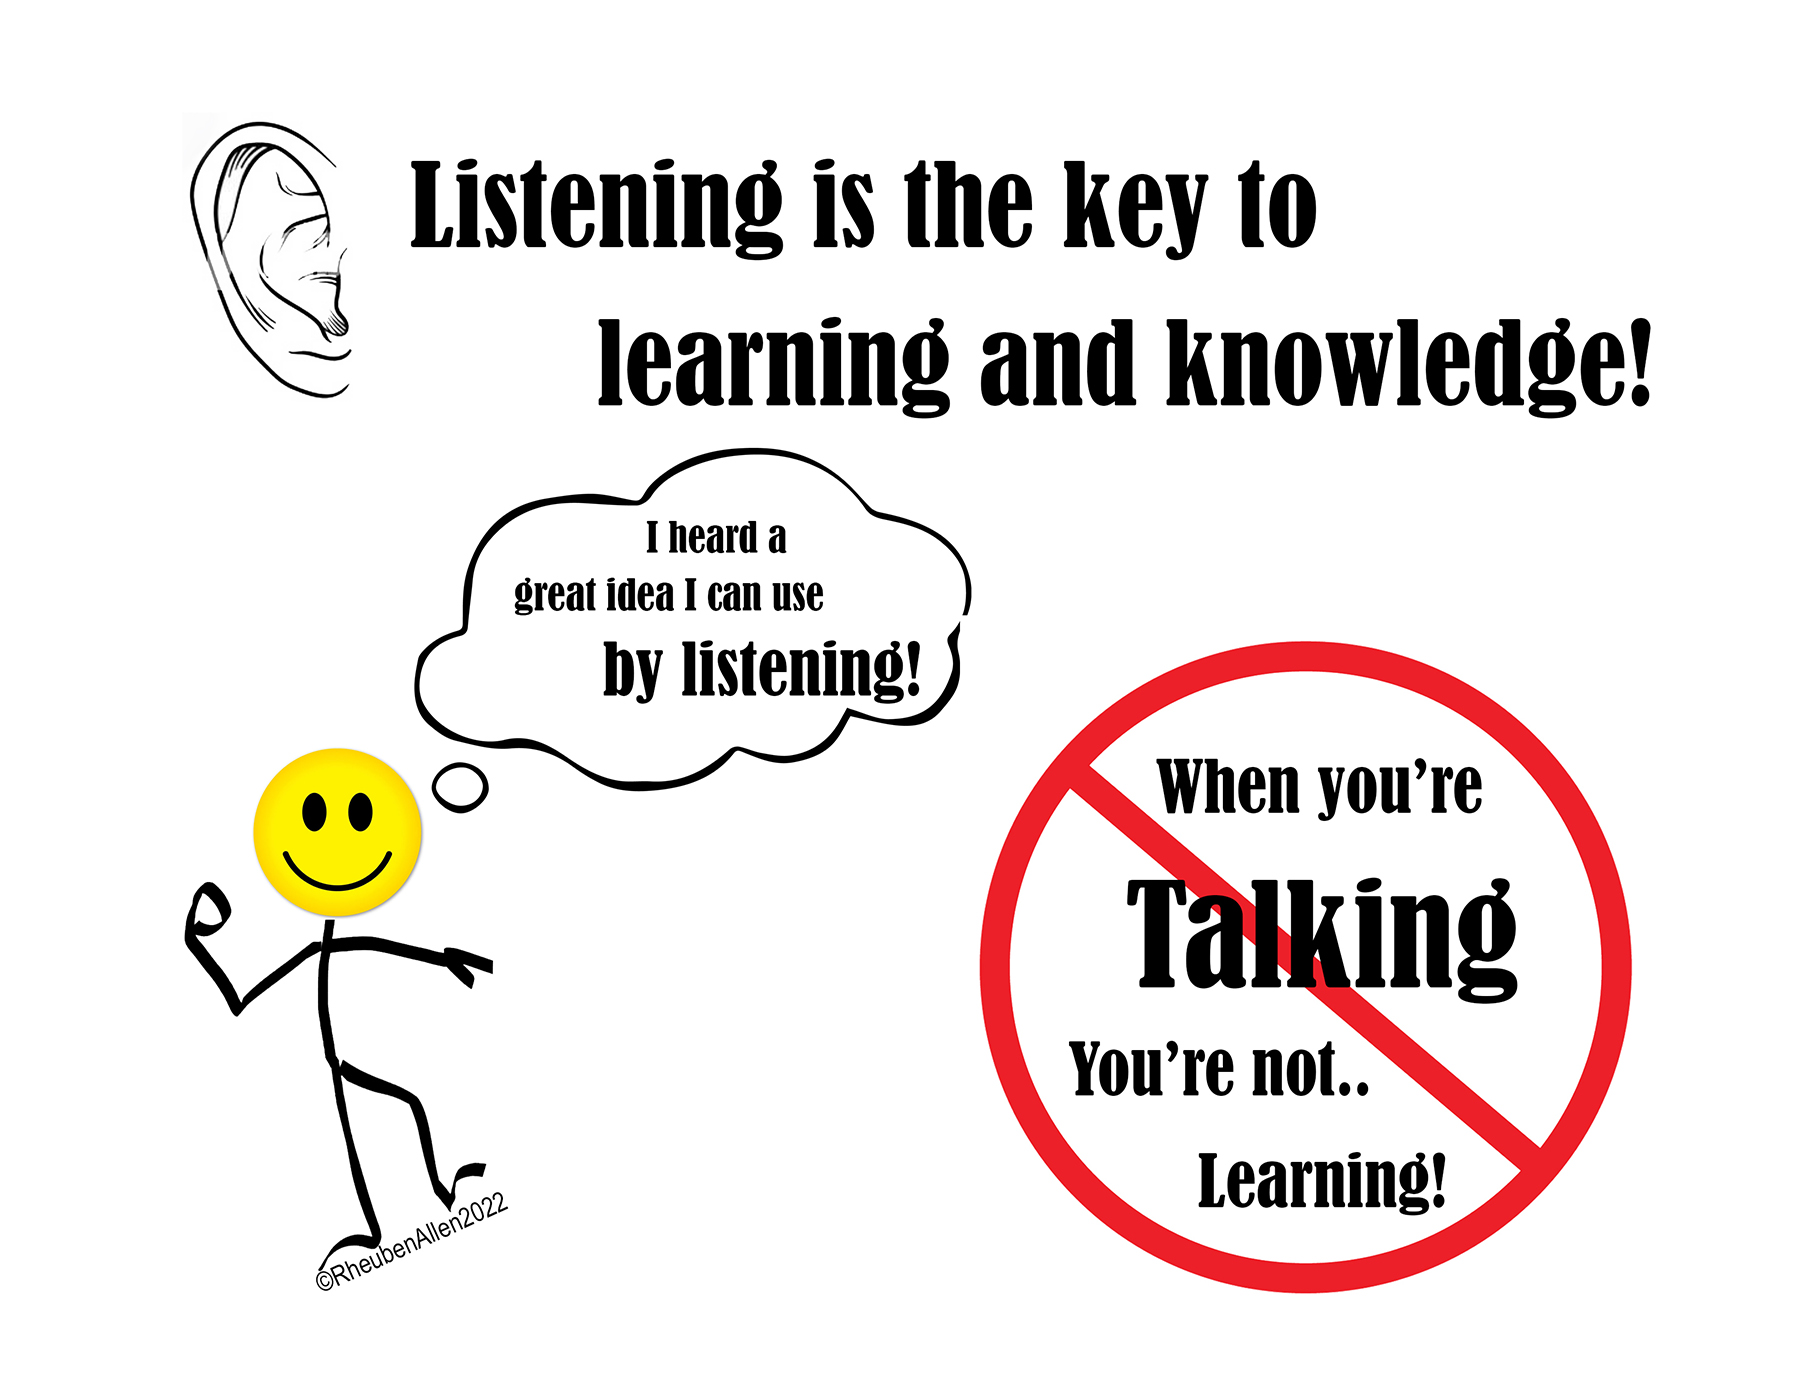 Listening is the key to larning and knowledge